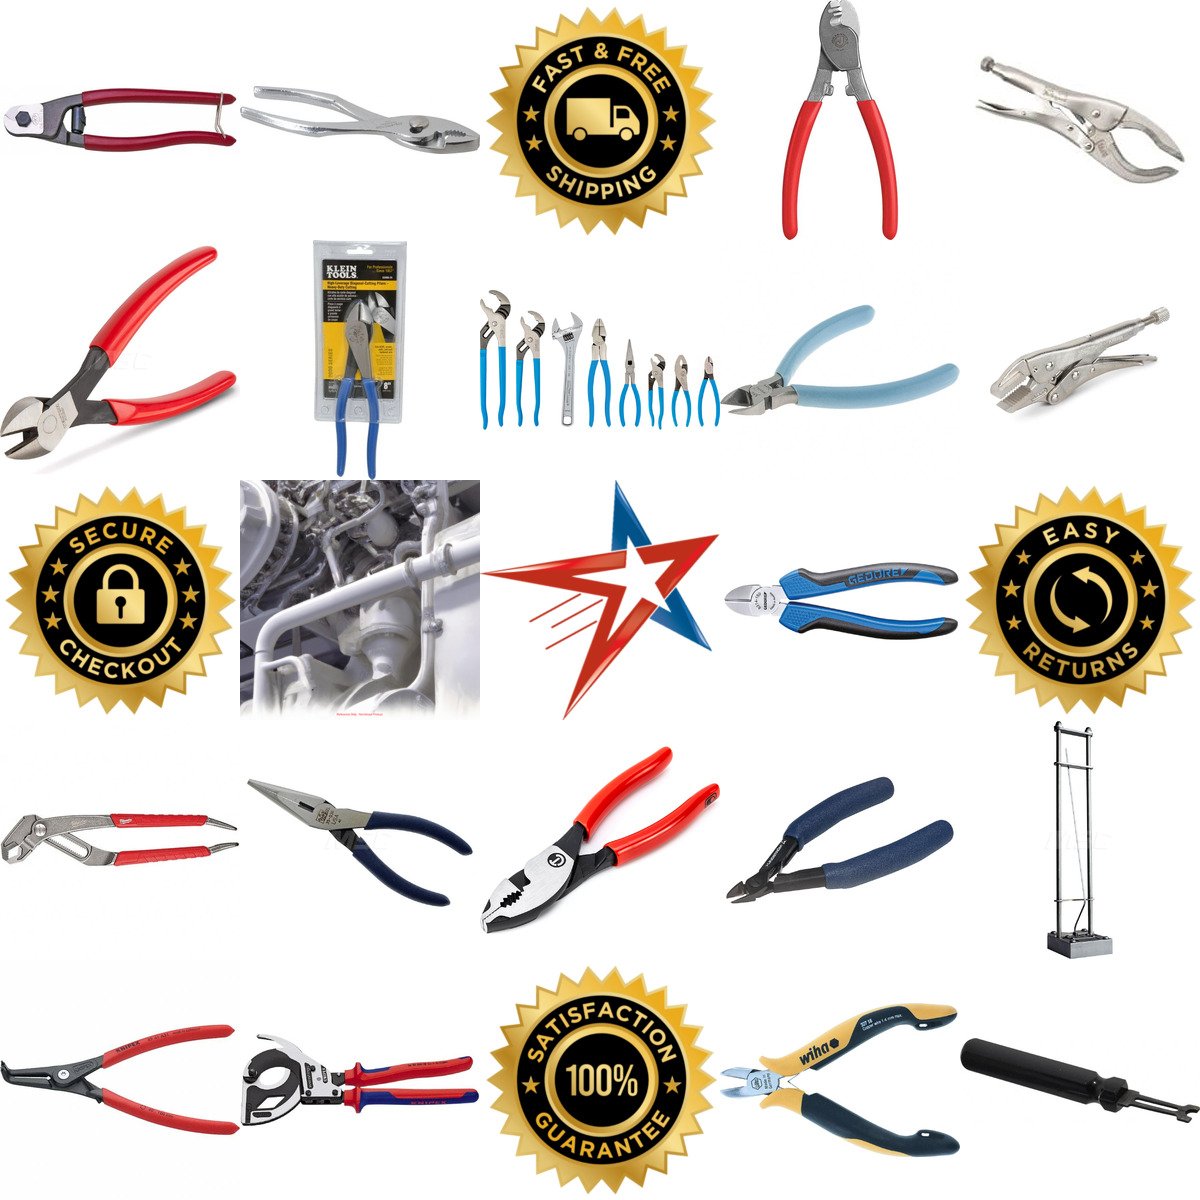 A selection of Pliers Plier Sets and Accessories products on GoVets